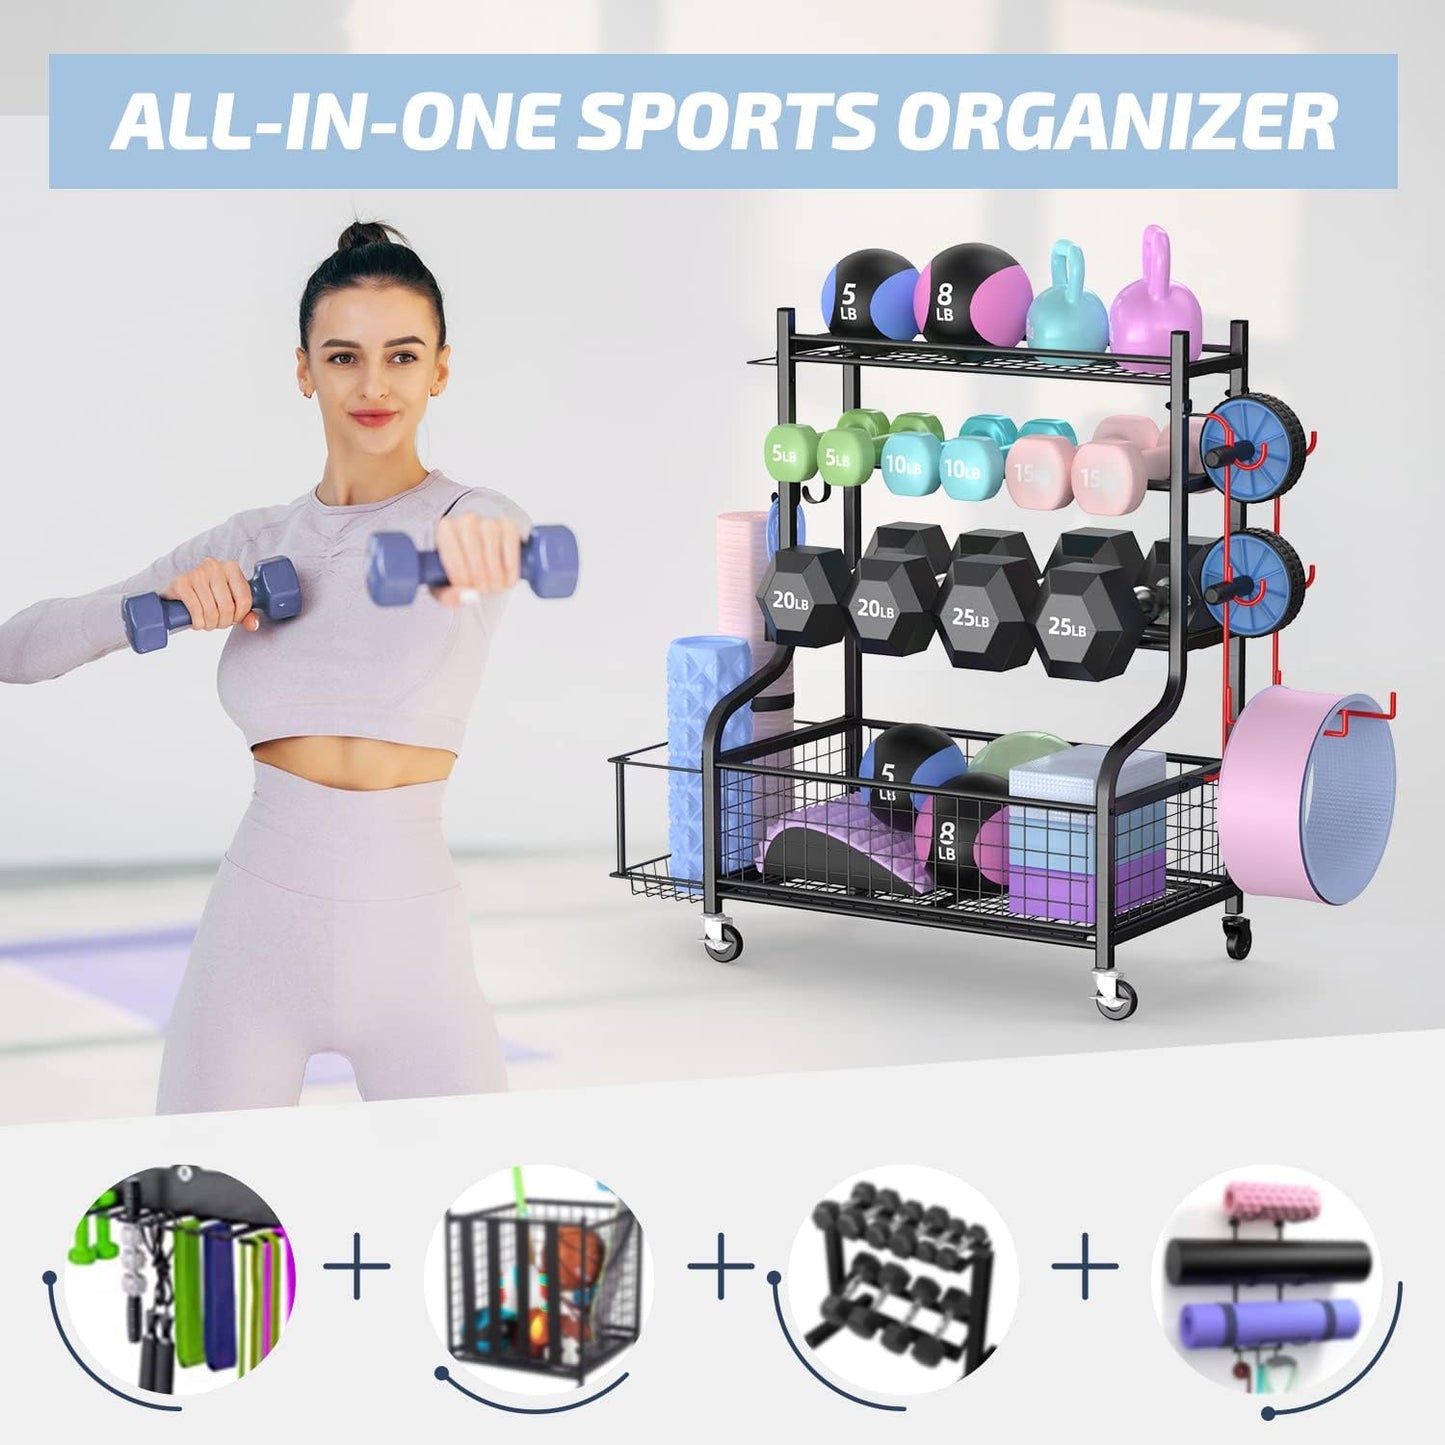 THE PLKOW Dumbbell Rack, Weight Rack for Dumbbells, Home Gym Storage for Dumbbells Kettlebells Yoga Mat and Balls, All in One Workout Storage with Wheels and Hooks, Powder Coated Finish Steel